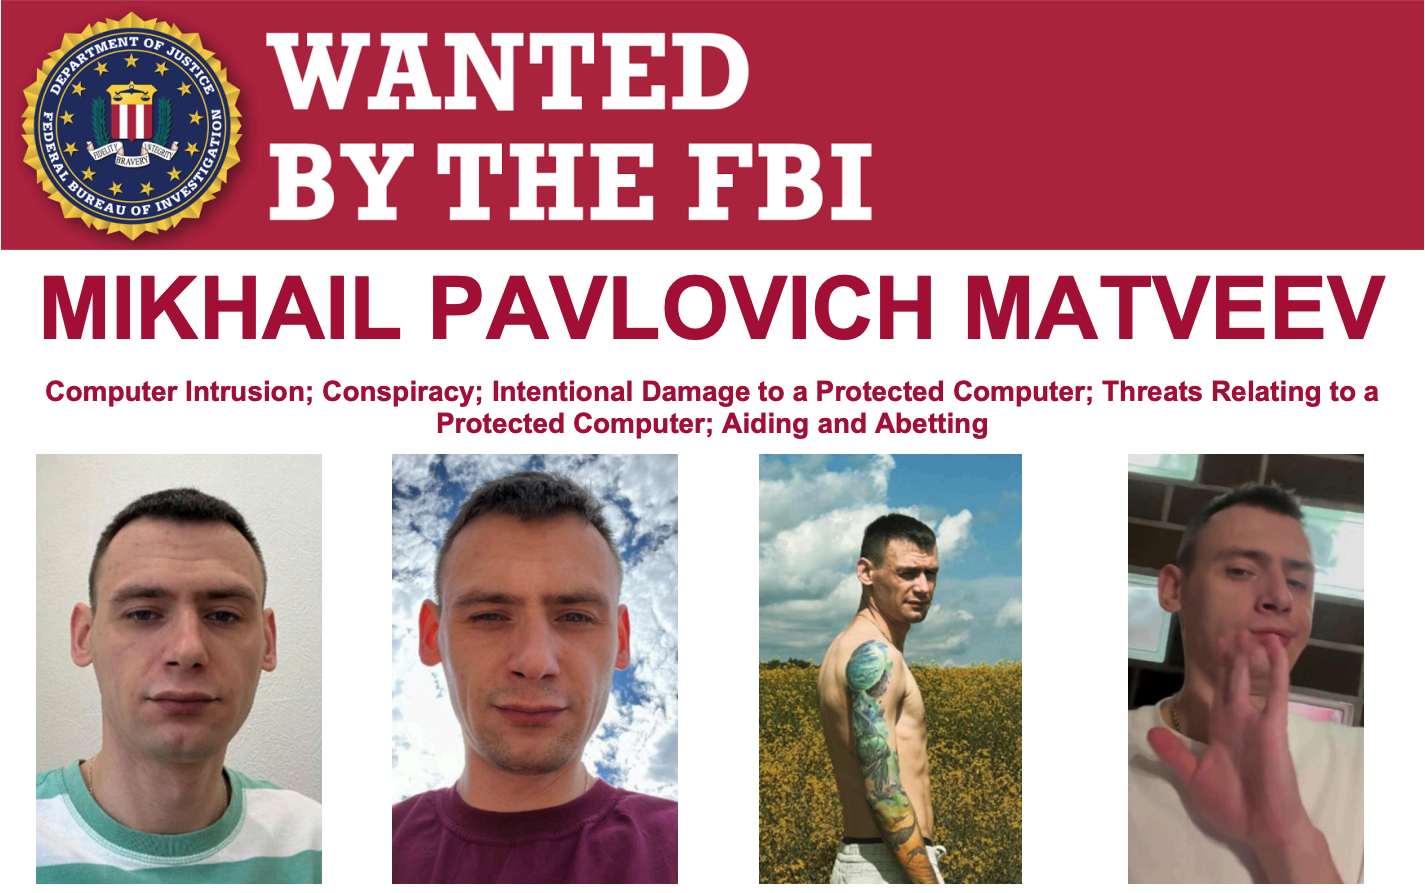 The FBI wanted poster for Mikhail Matveev.